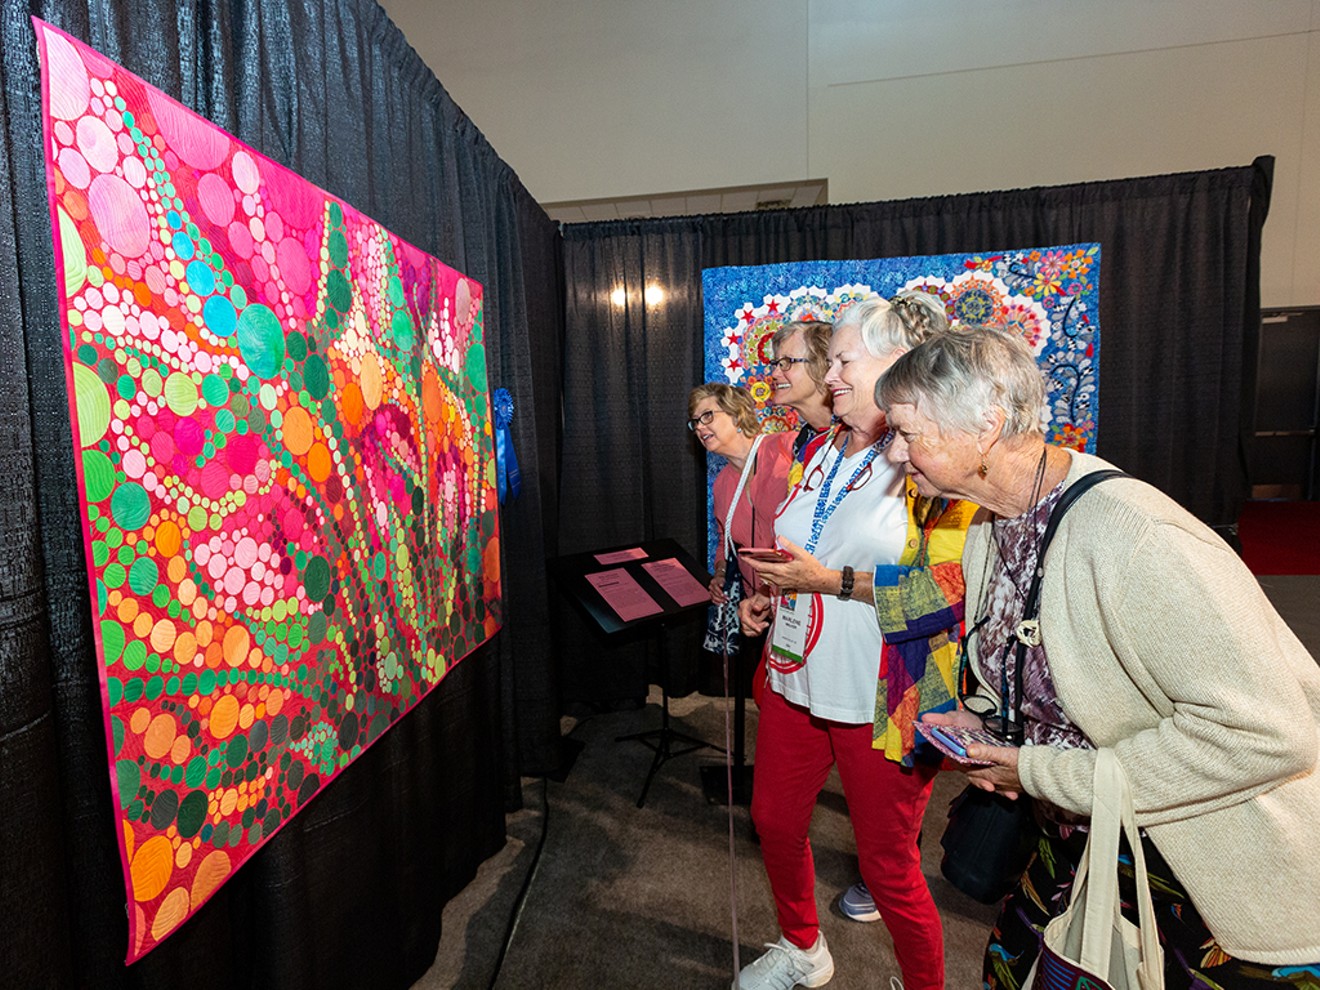 The International Quilt Festival returns to George R. Brown Convention Center.